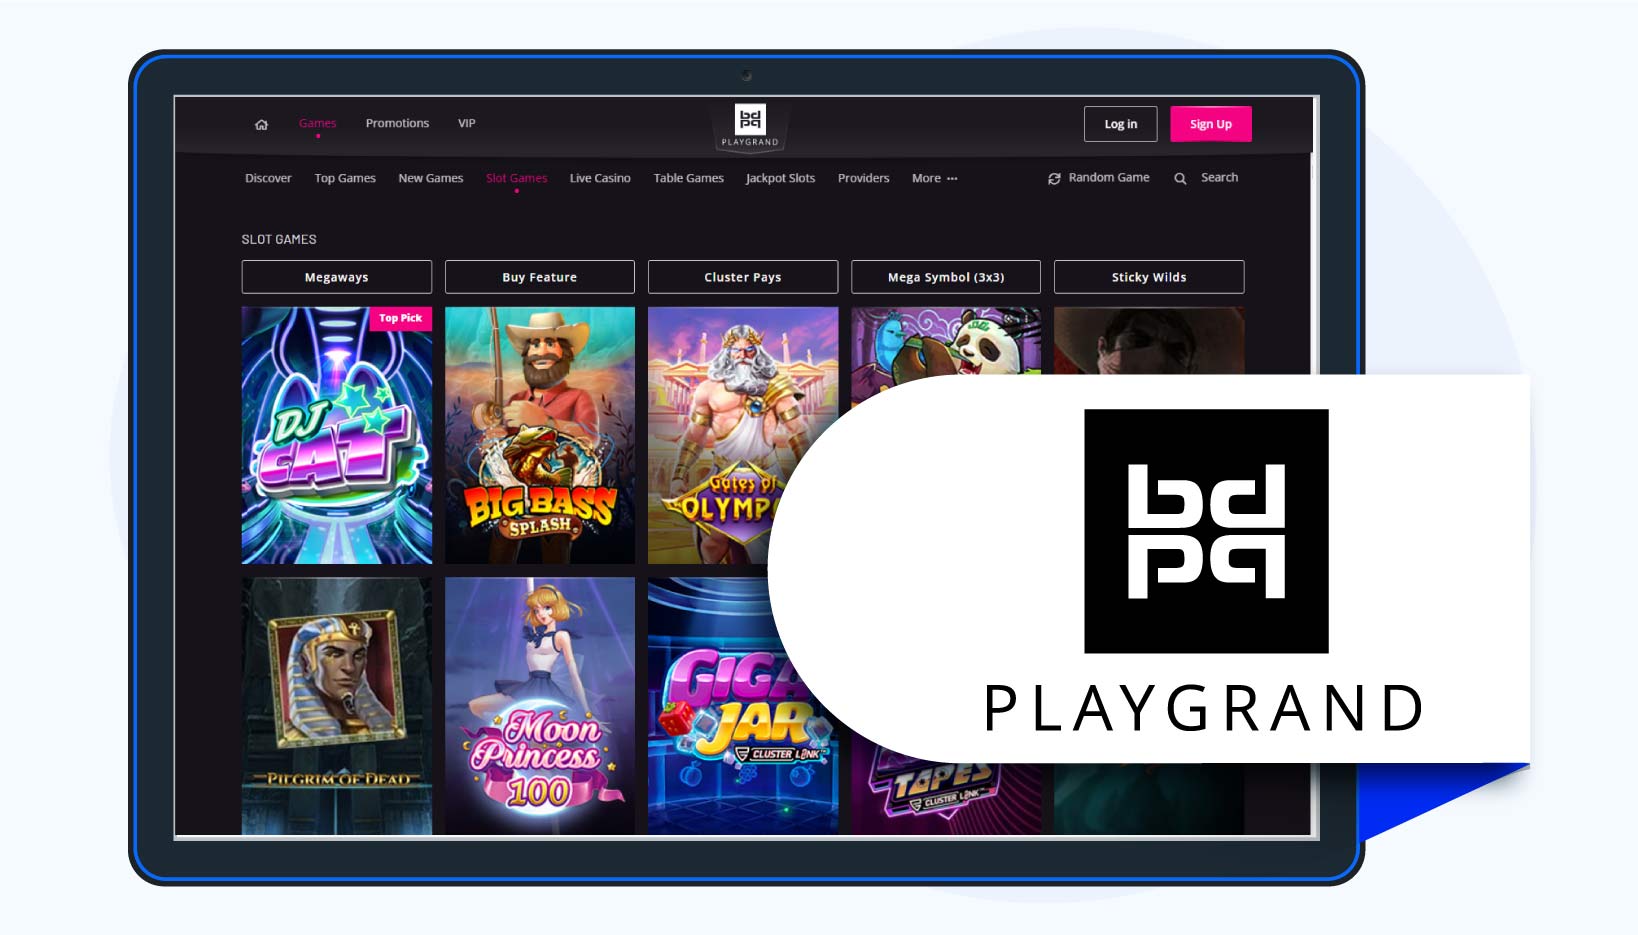 50 free no deposit free spins on Book of Dead at PlayGrand Casino